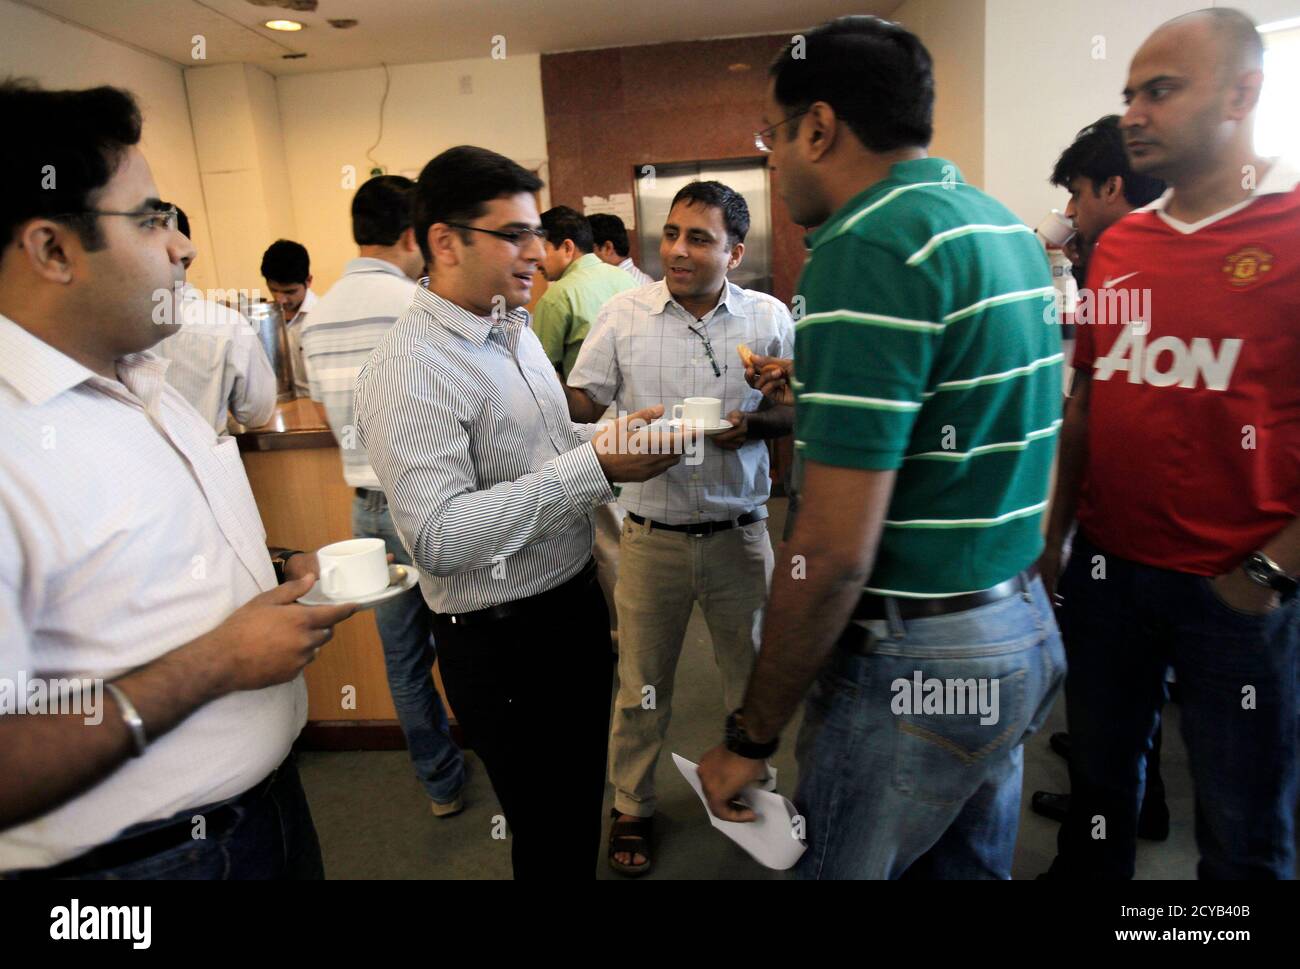 Master of Business Administration (MBA) students share a moment during a  break from their class at the Management Development Institute (MDI) in  Gurgaon, on the outskirts of New Delhi May 2, 2012.